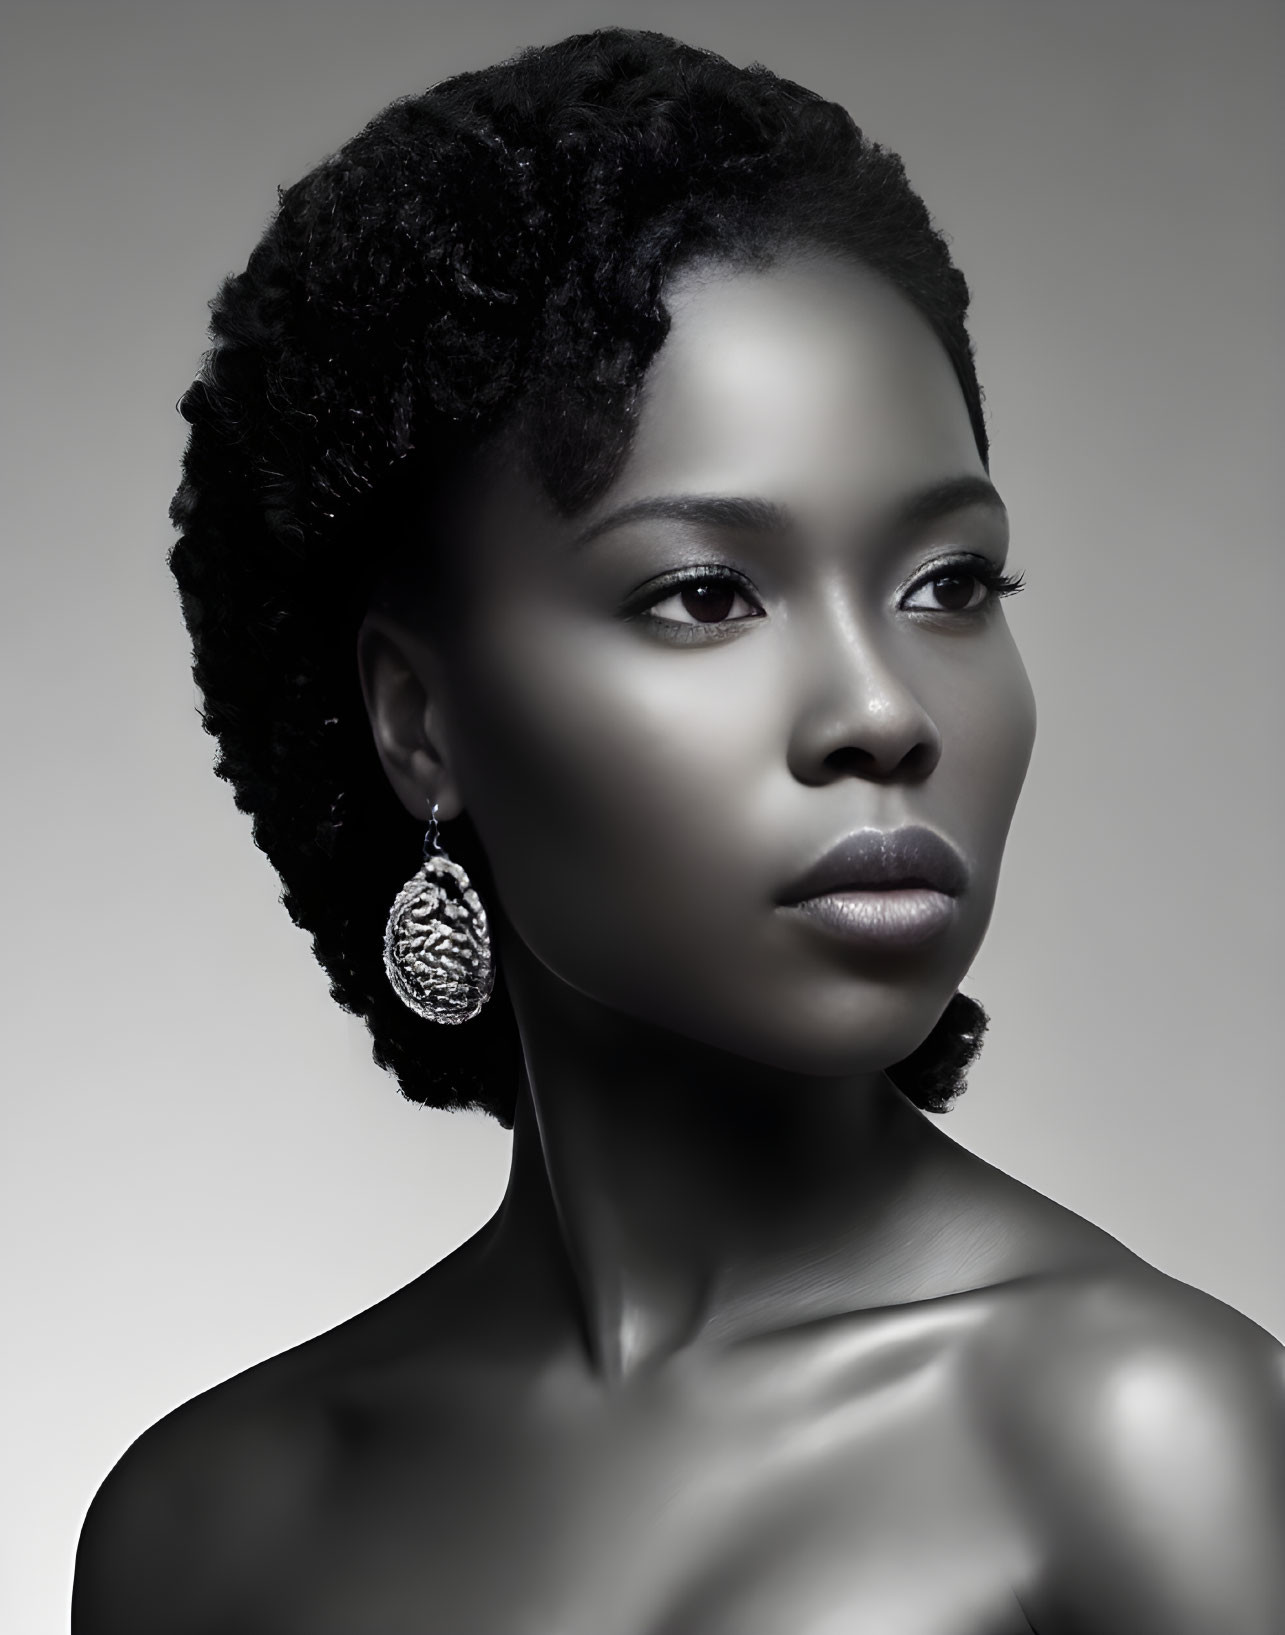 Grayscale portrait of a woman with elegant earrings and styled natural hair.